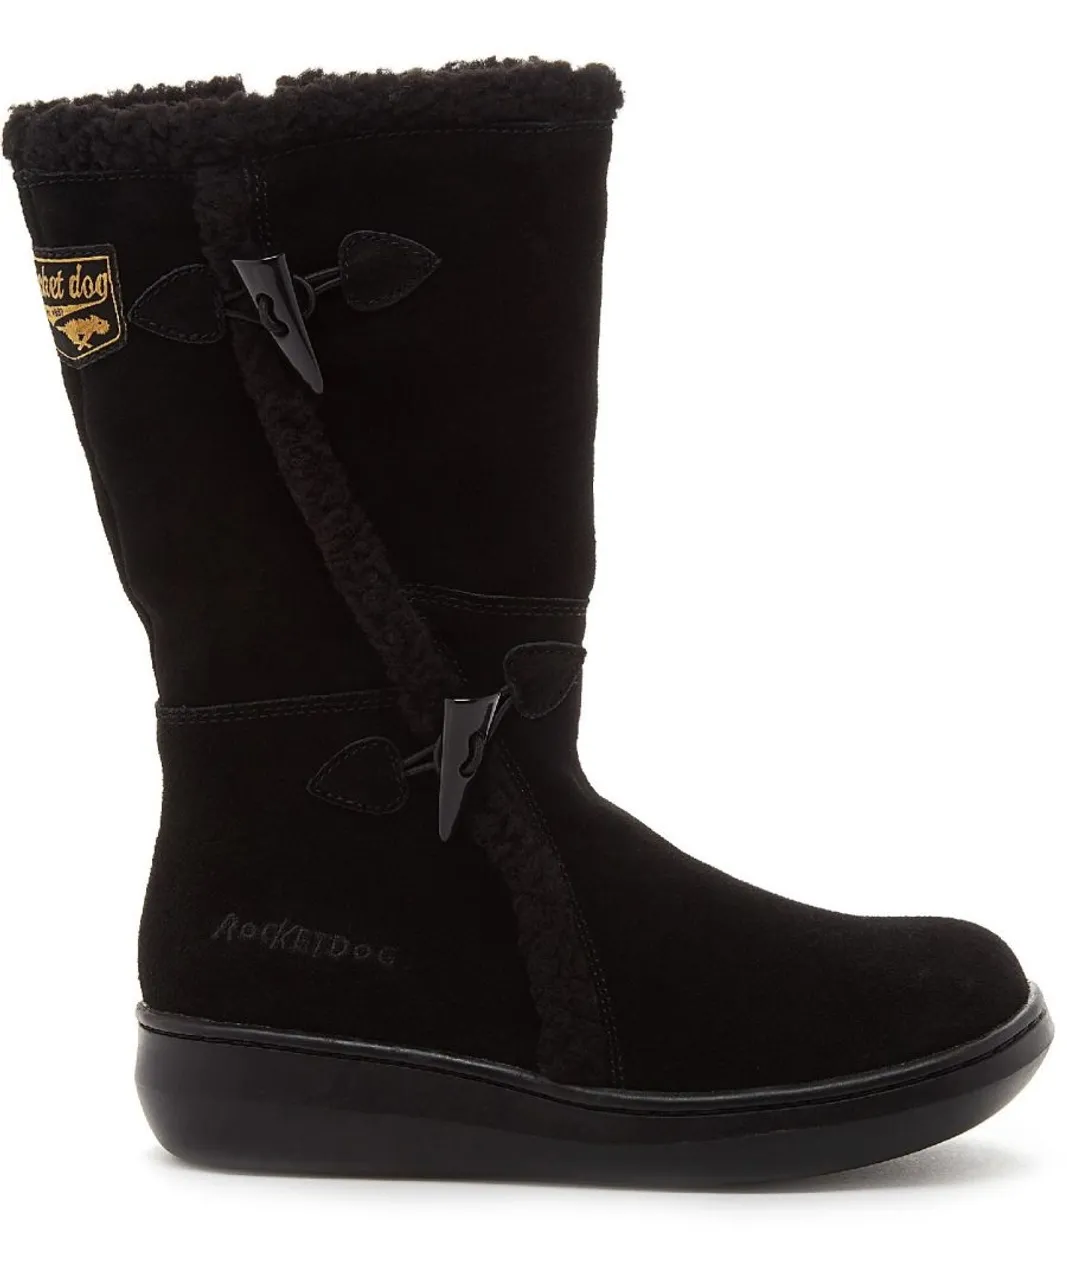 Rocket Dog Womens Slope Mid-Calf Winter Boot - Black Leather